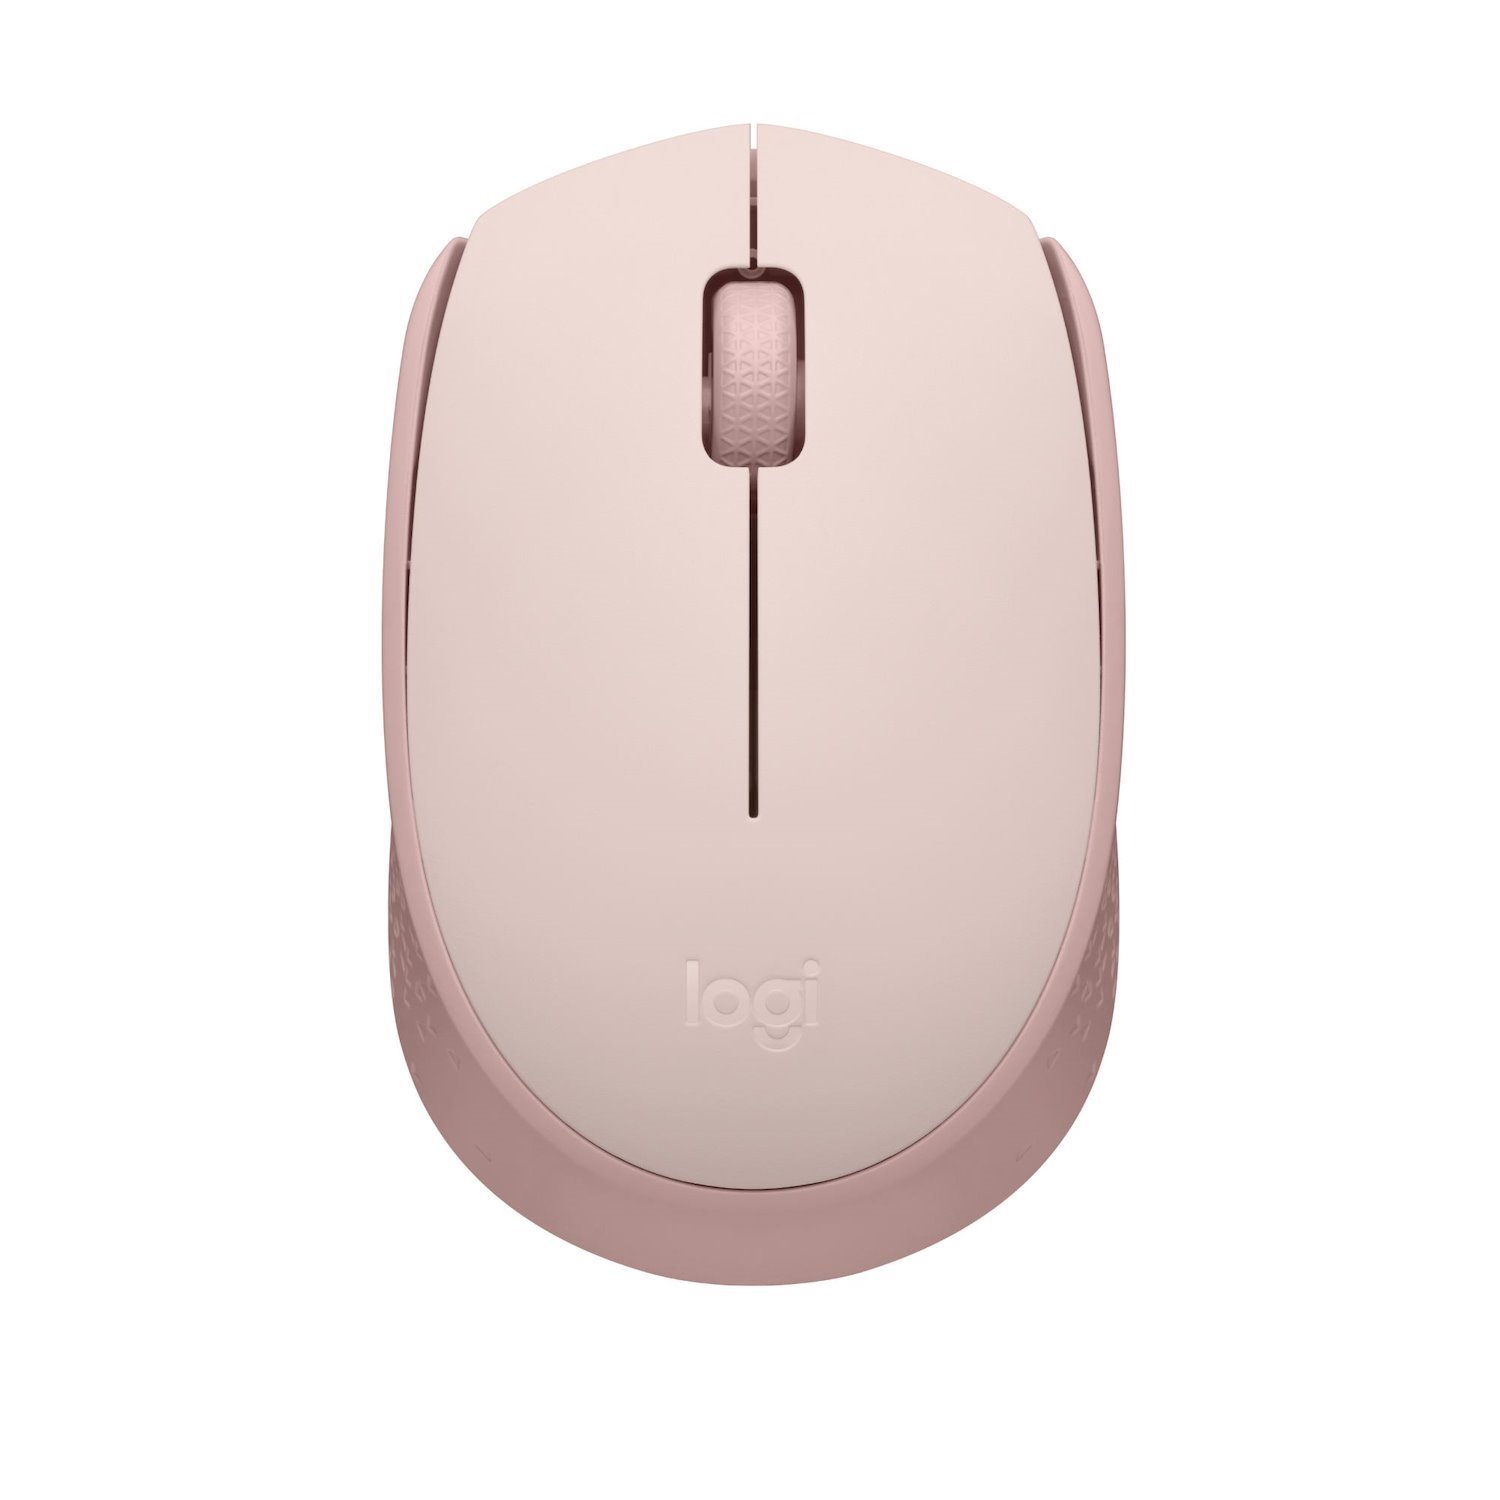 Logitech M171 Mouse - Radio Frequency - USB - Optical - 3 Button(s) - Rose